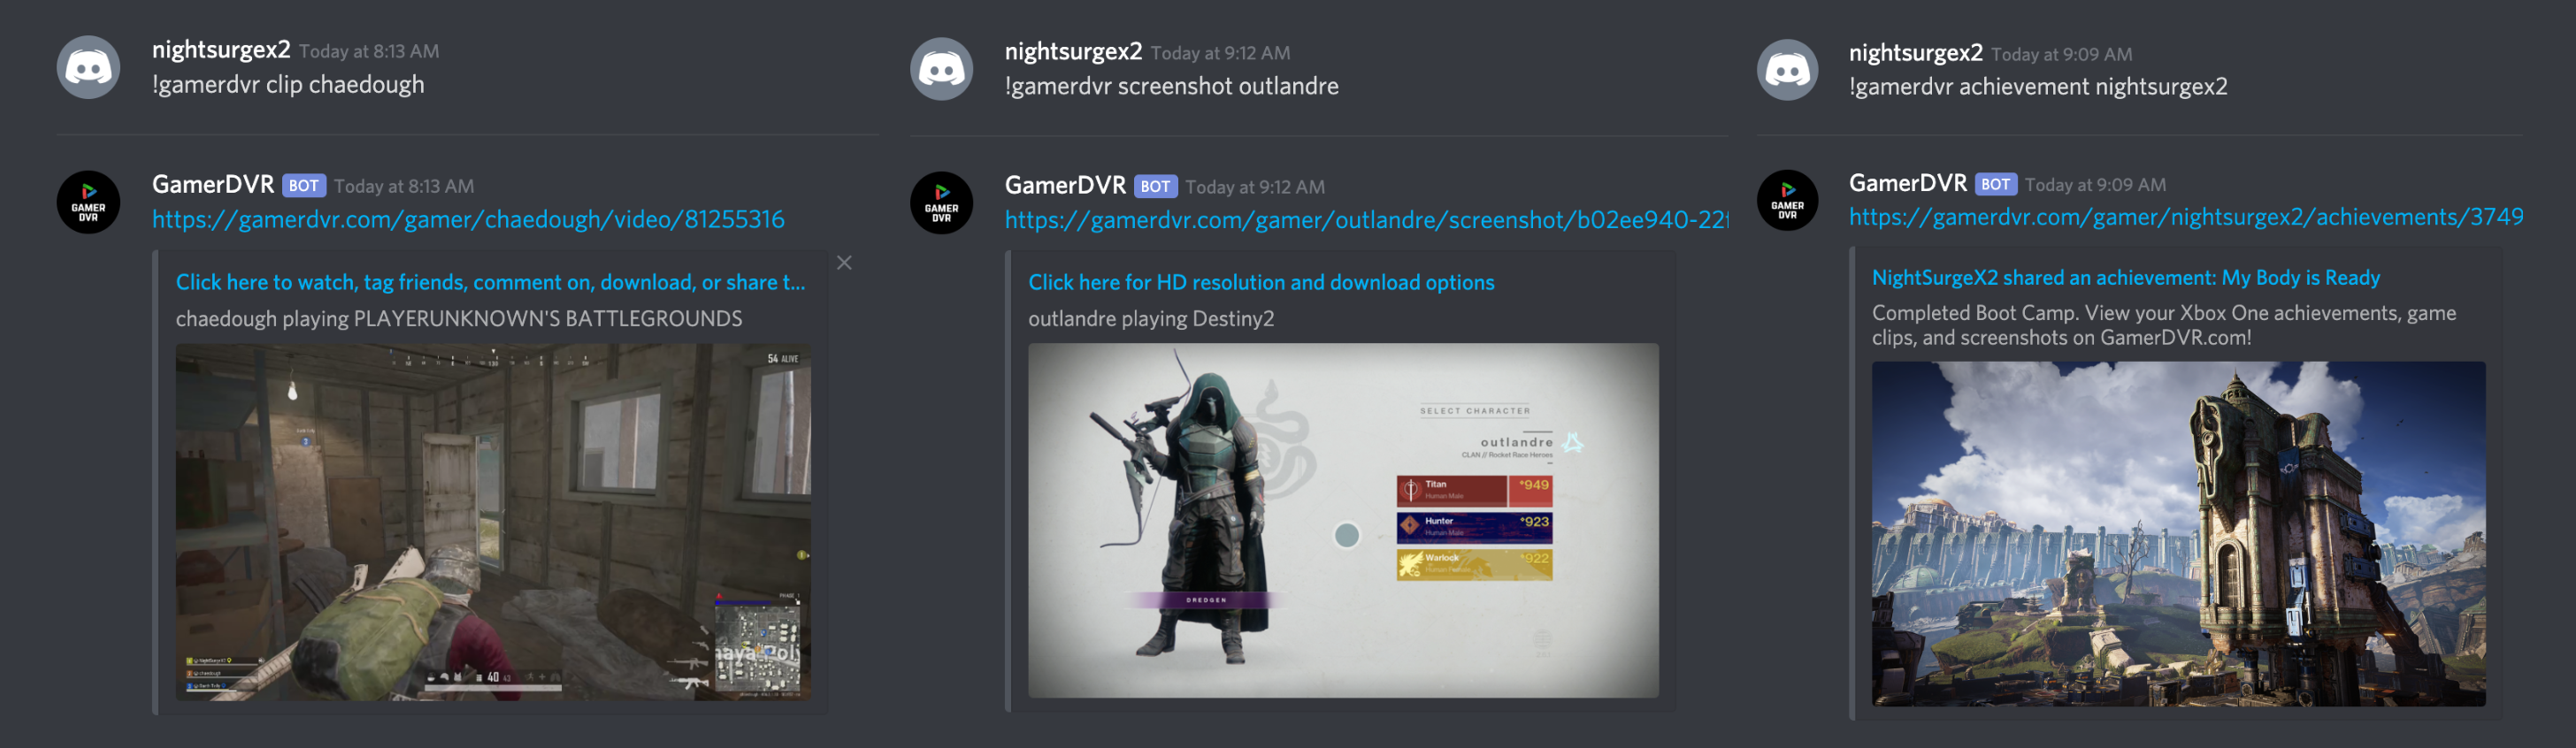 Examples of Xbox Discord commands with their responses